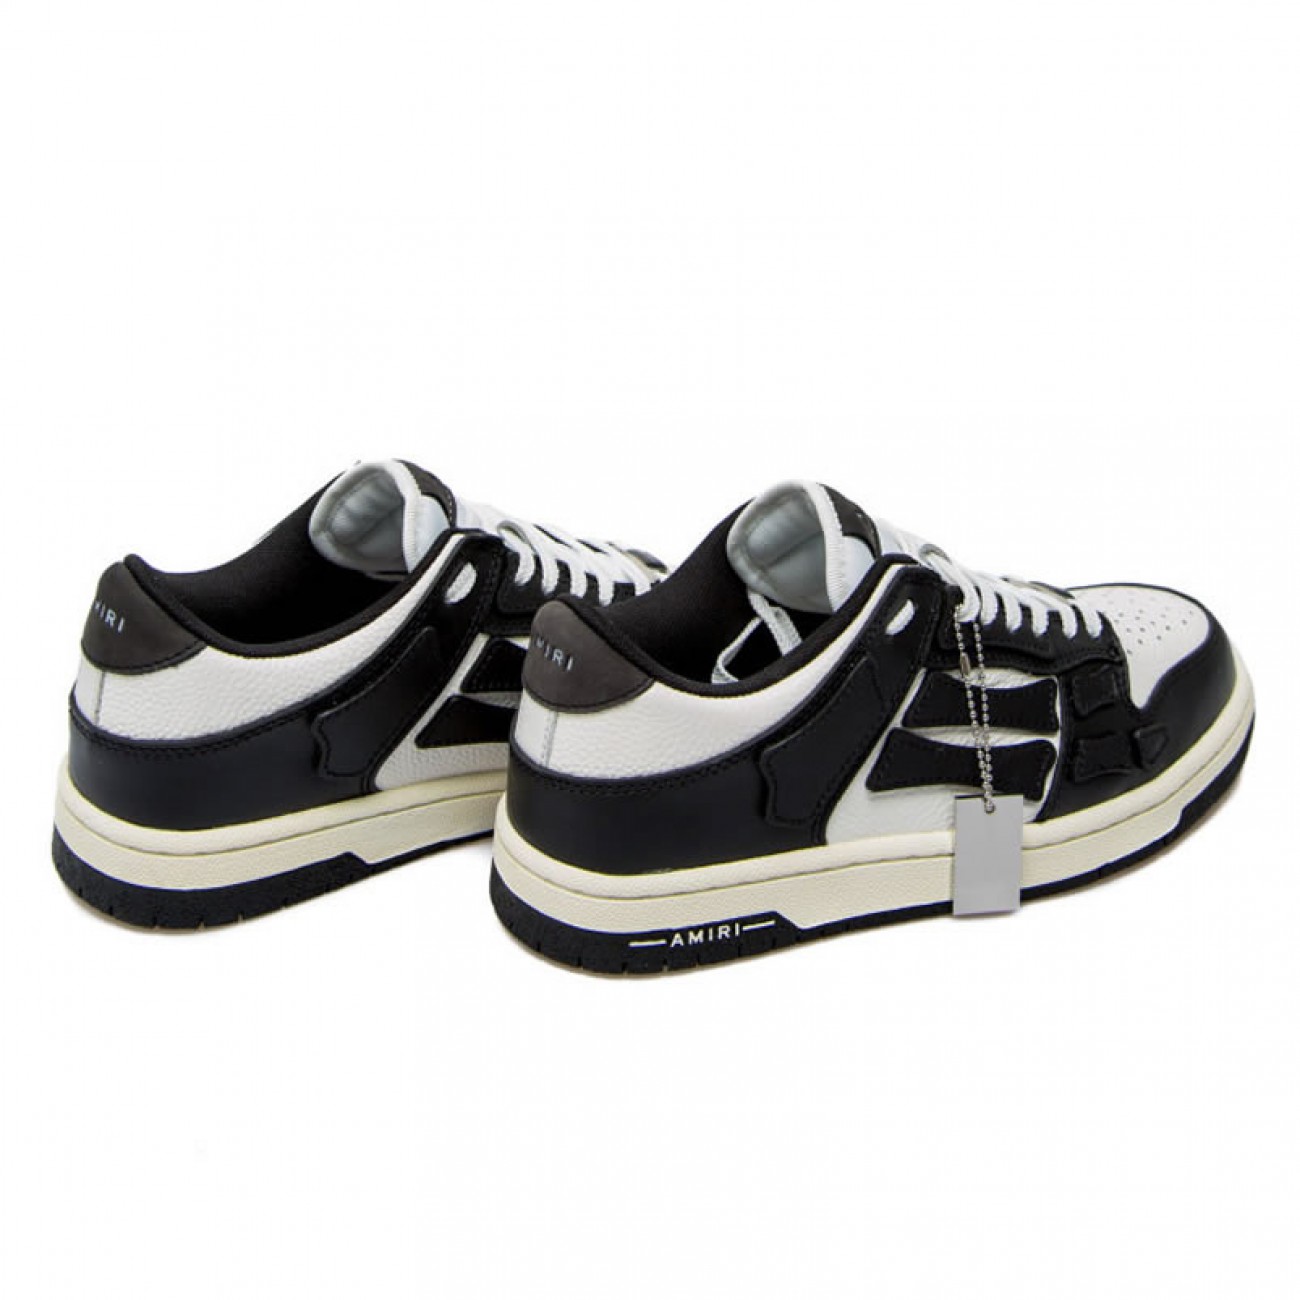 A.M.I.R.I Skel Top Low Leather Sneakers Black White MFS003-004